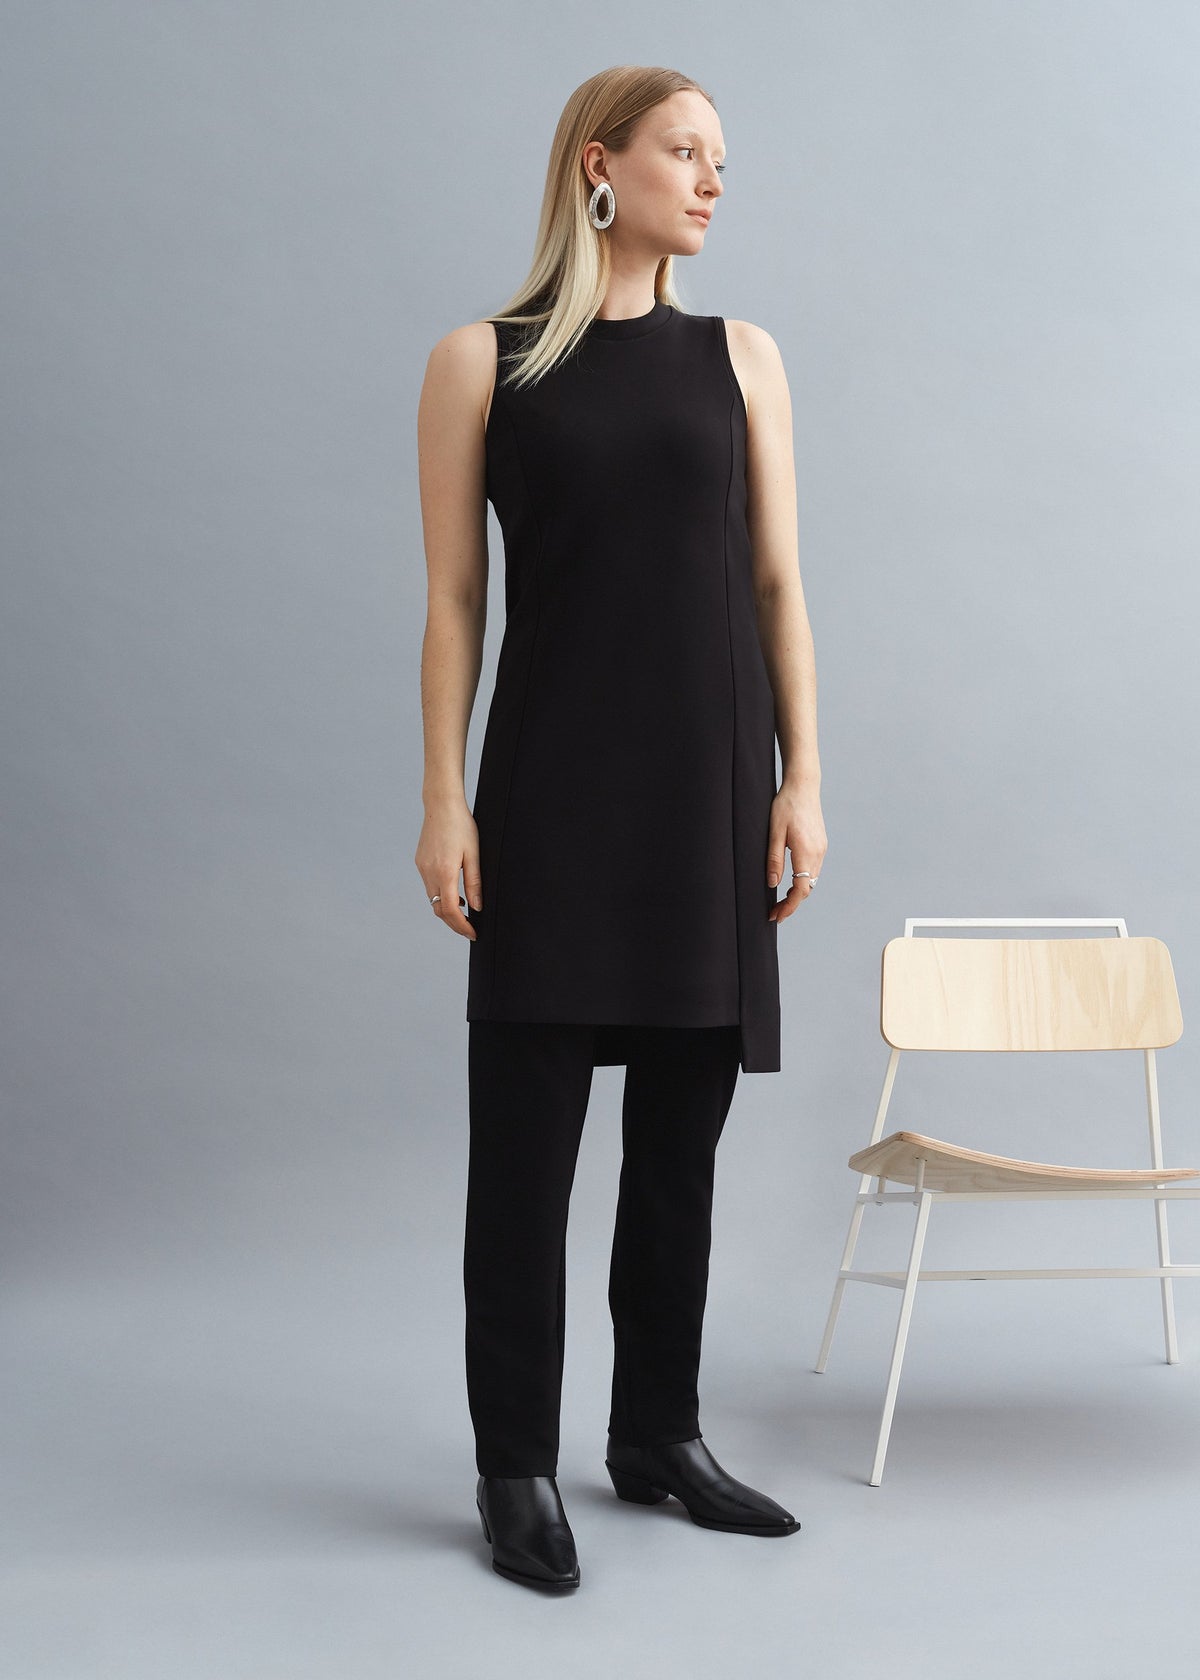 ANCOLIE. Asymmetric dress with small collar. Black